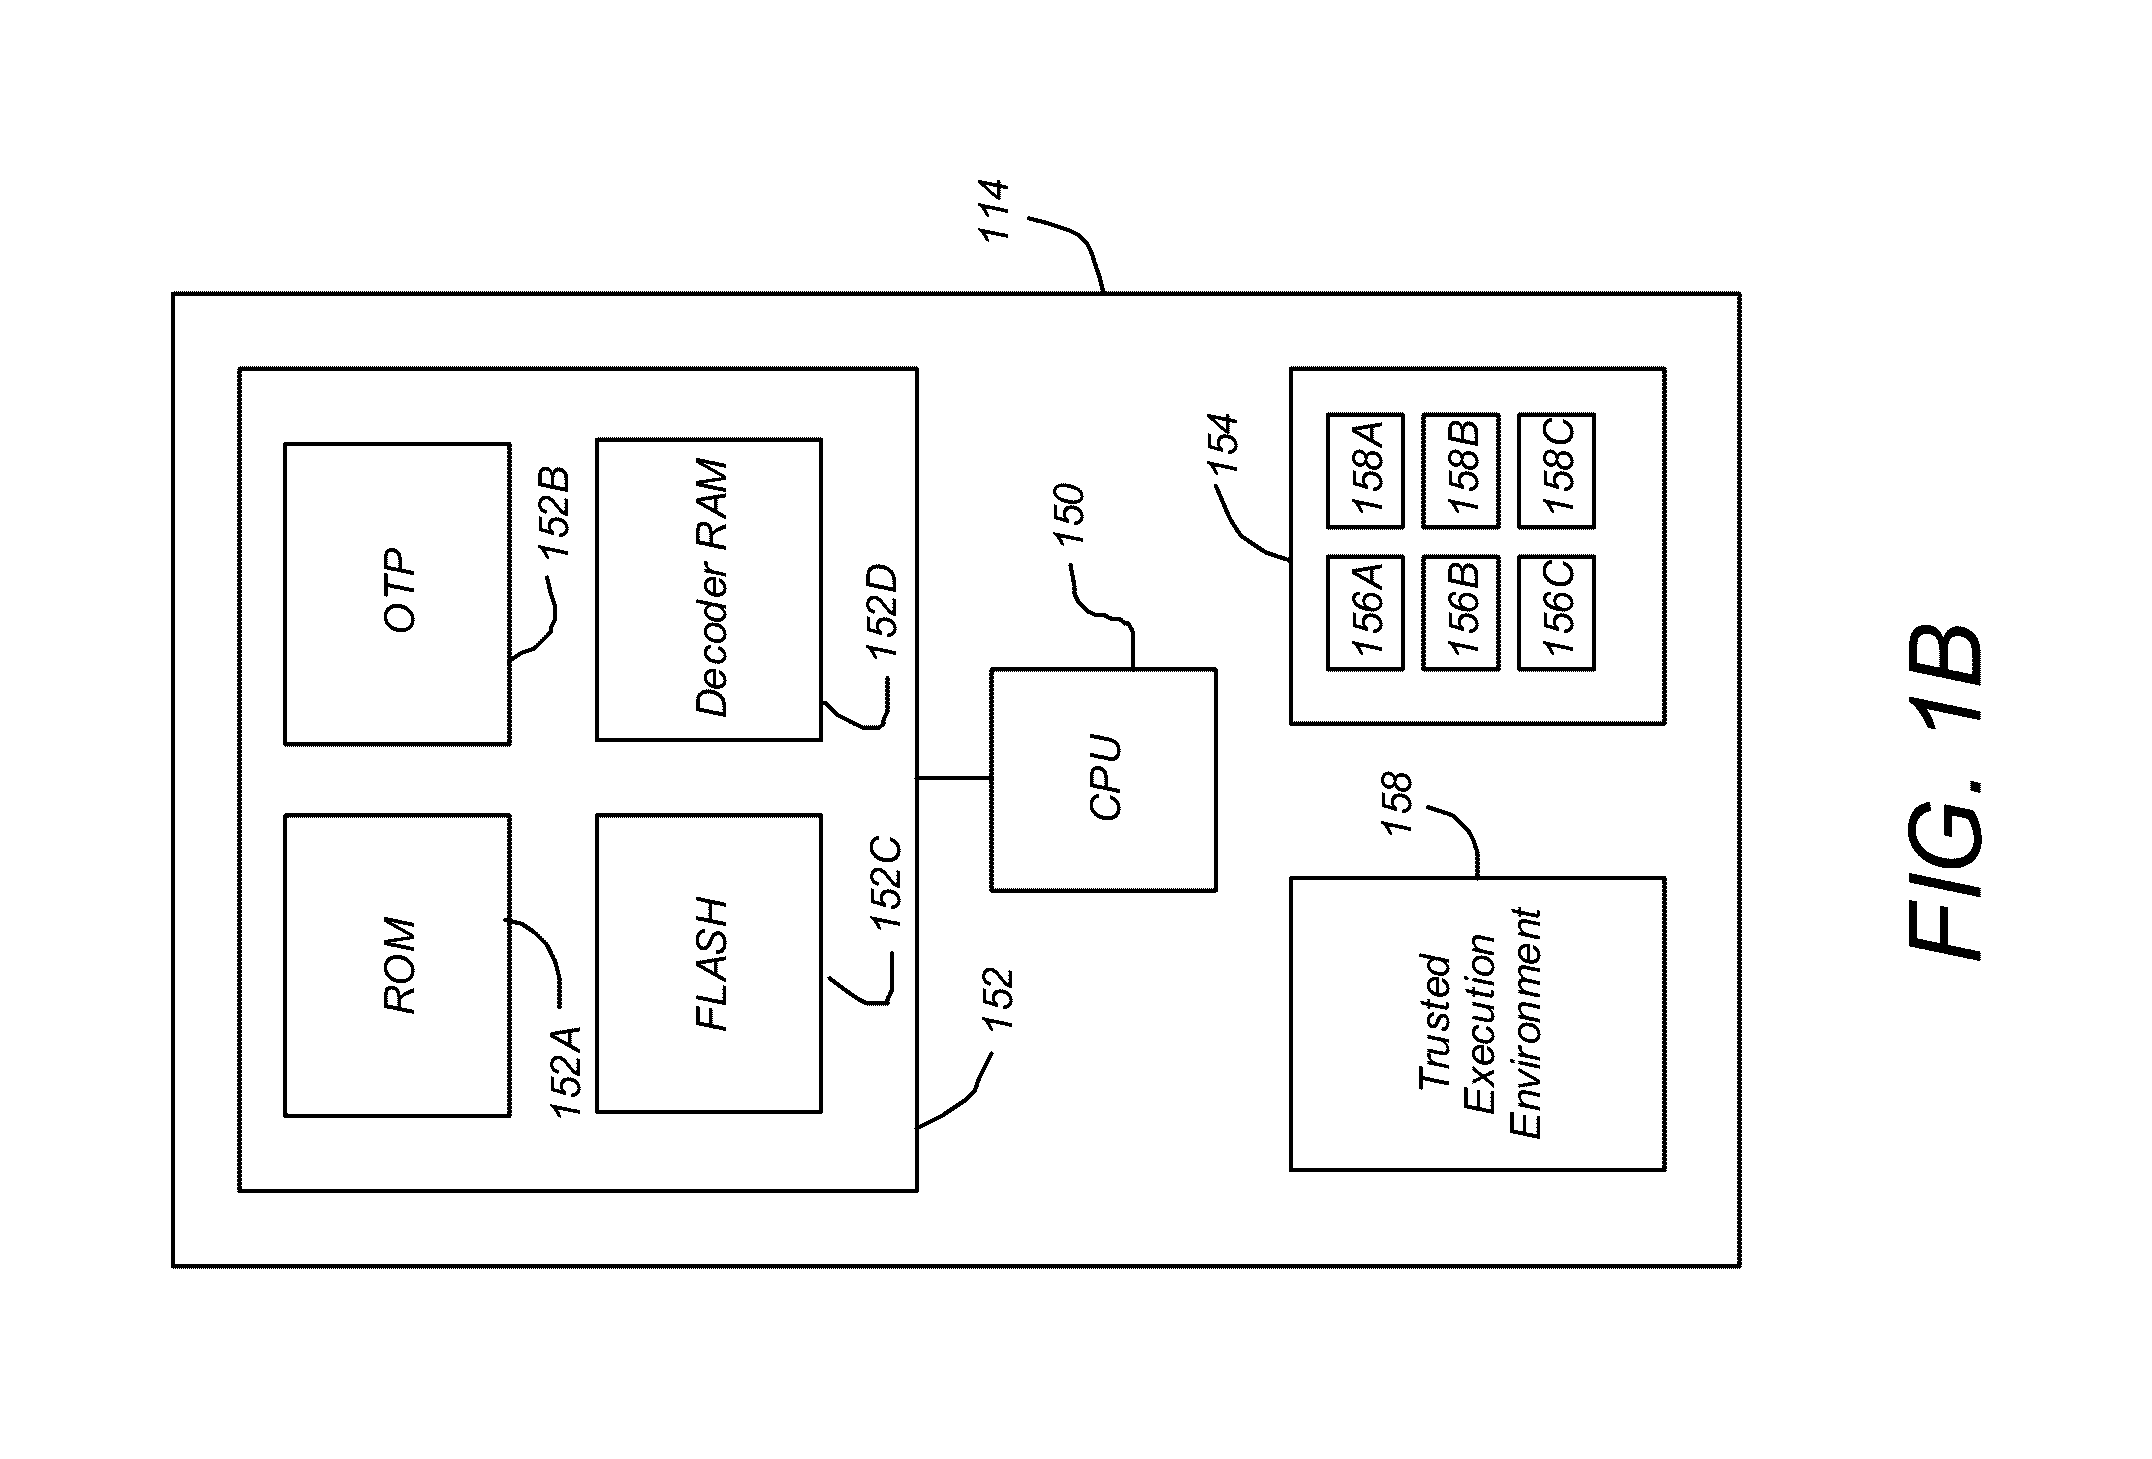 Method and apparatus for a blackbox programming system permitting downloadable applications and multiple security profiles providing hardware separation of services in hardware constrained devices